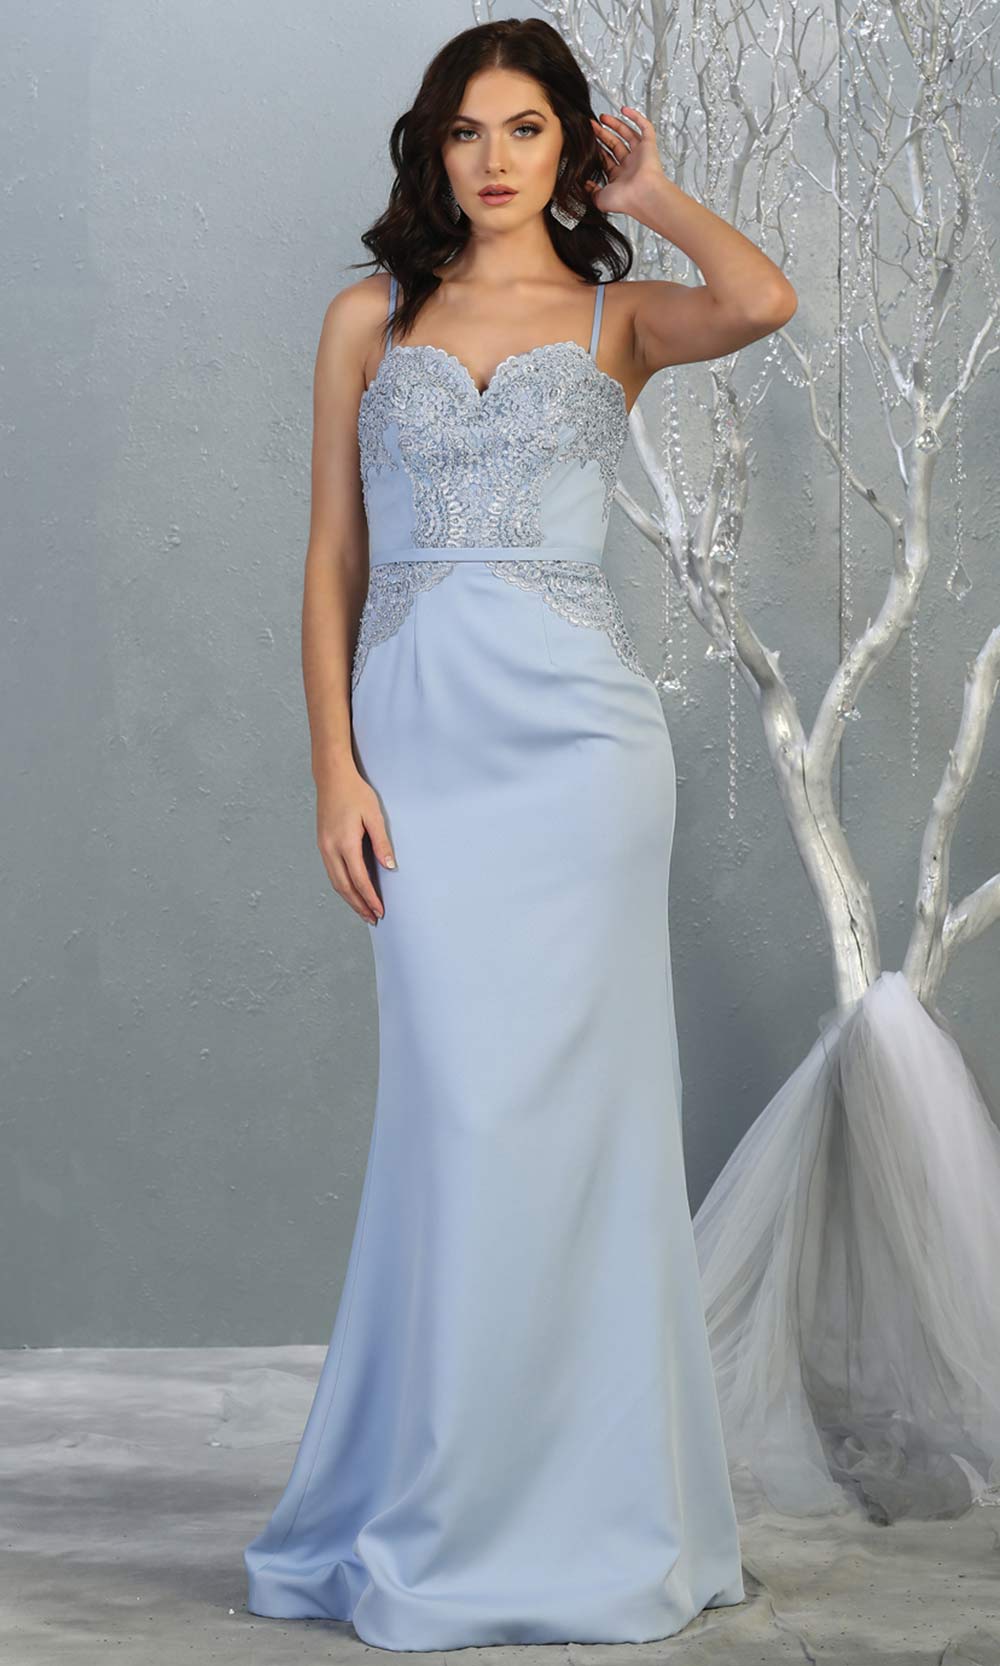 Mayqueen MQ1759 long dusty blue lace top evening fitted dress w/straps. Full length blue grey gown is perfect for bridesmaids, enagagement/e-shoot dress, wedding guest dress, indowestern gown, formal evening party dress, prom. Plus sizes avail.jpg